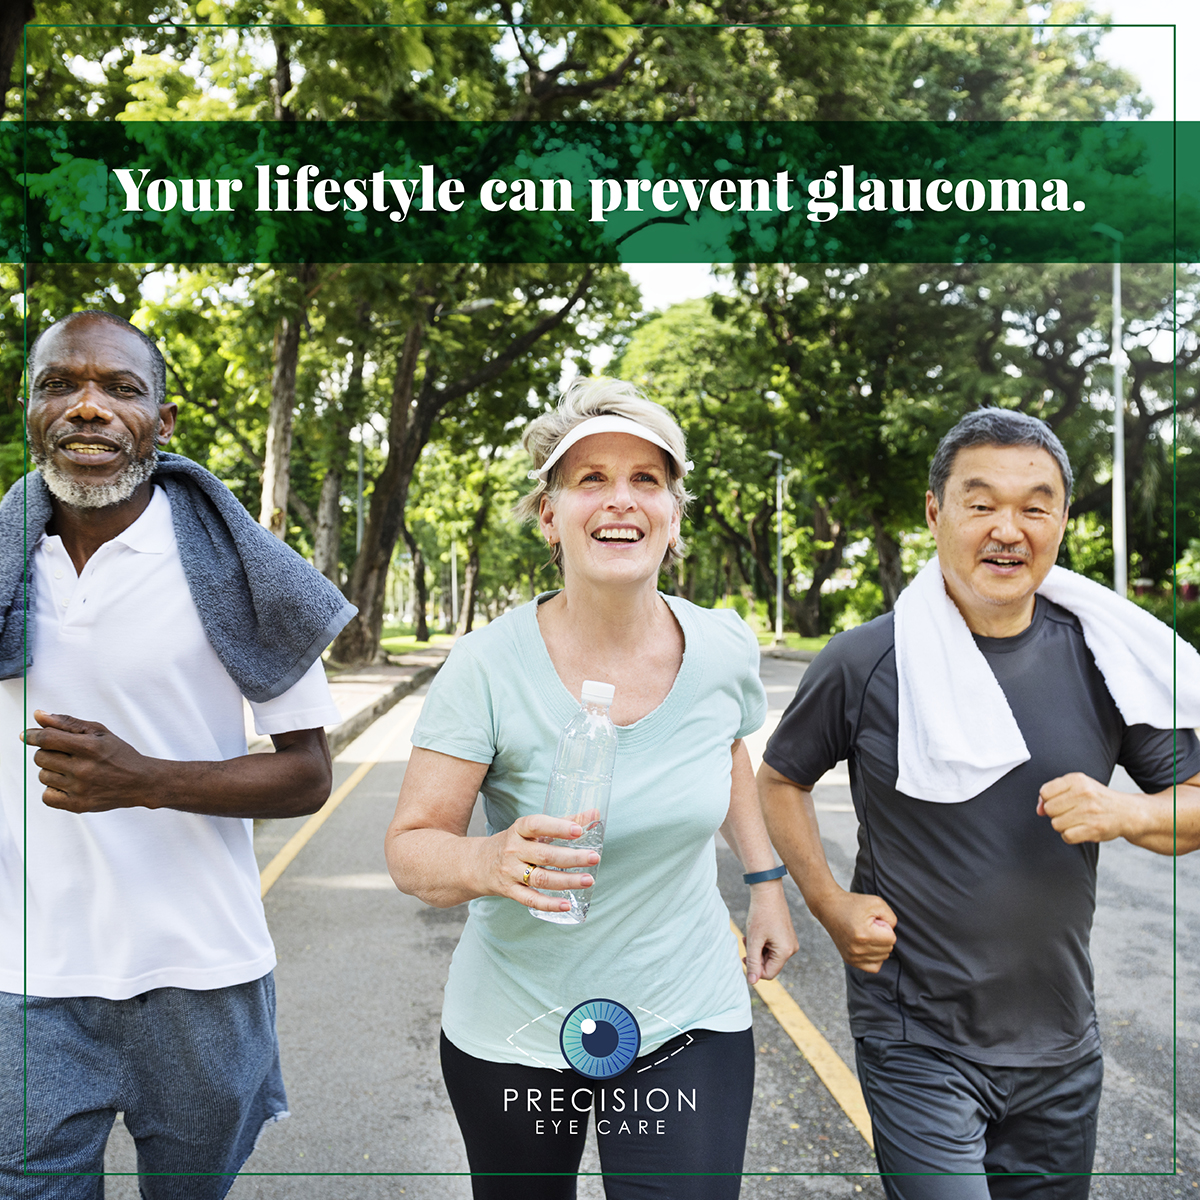 Your lifestyle can prevent glaucoma.